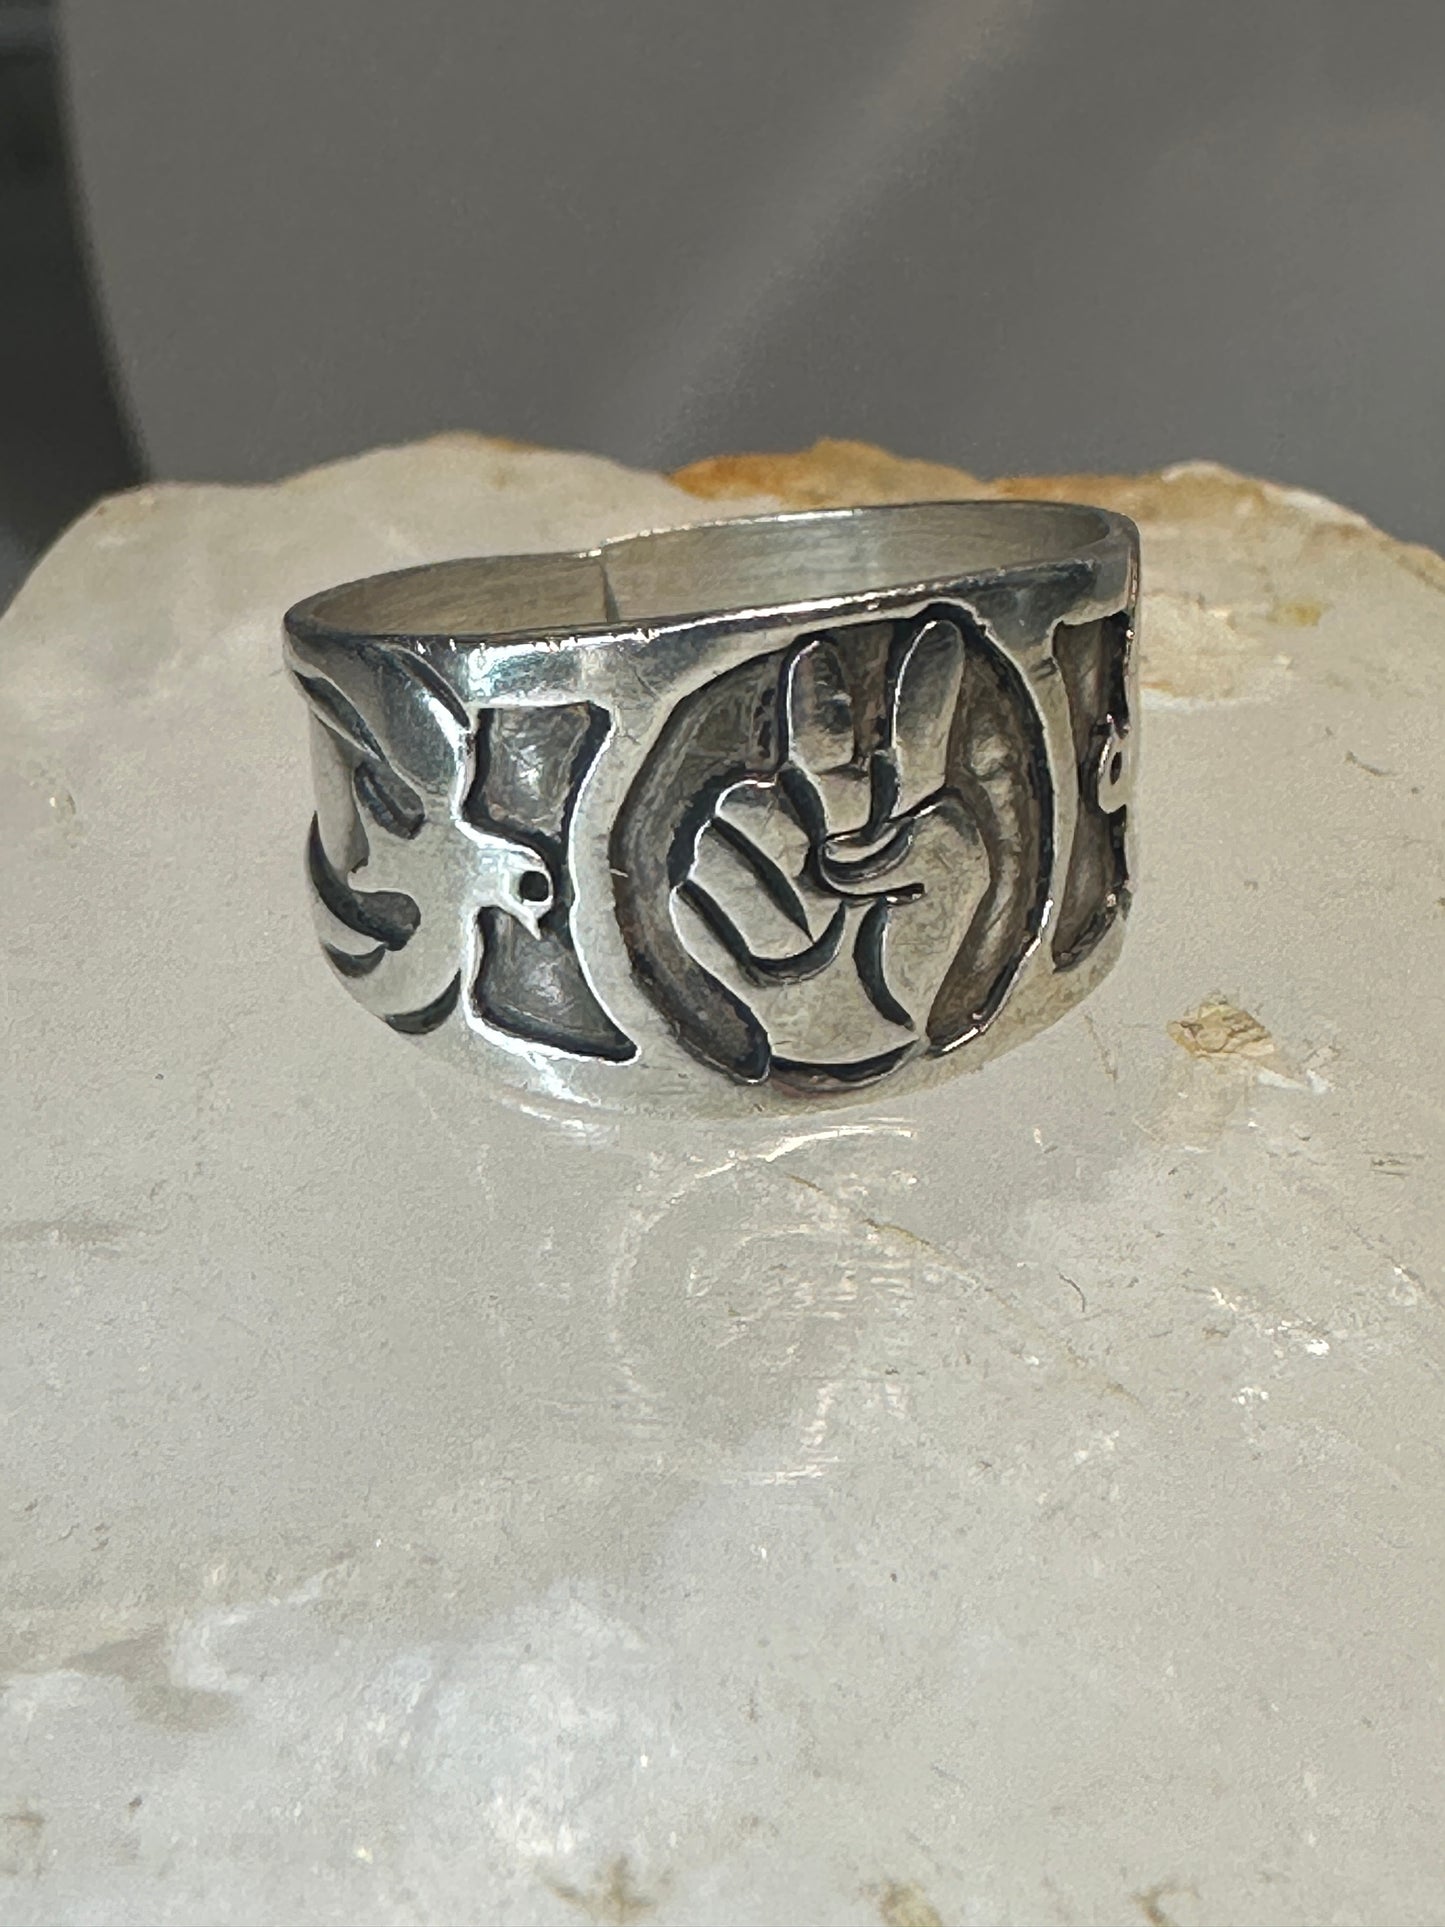 Peace ring Mexico fingers band size 8.25  Love  bird  dove band sterling silver women men